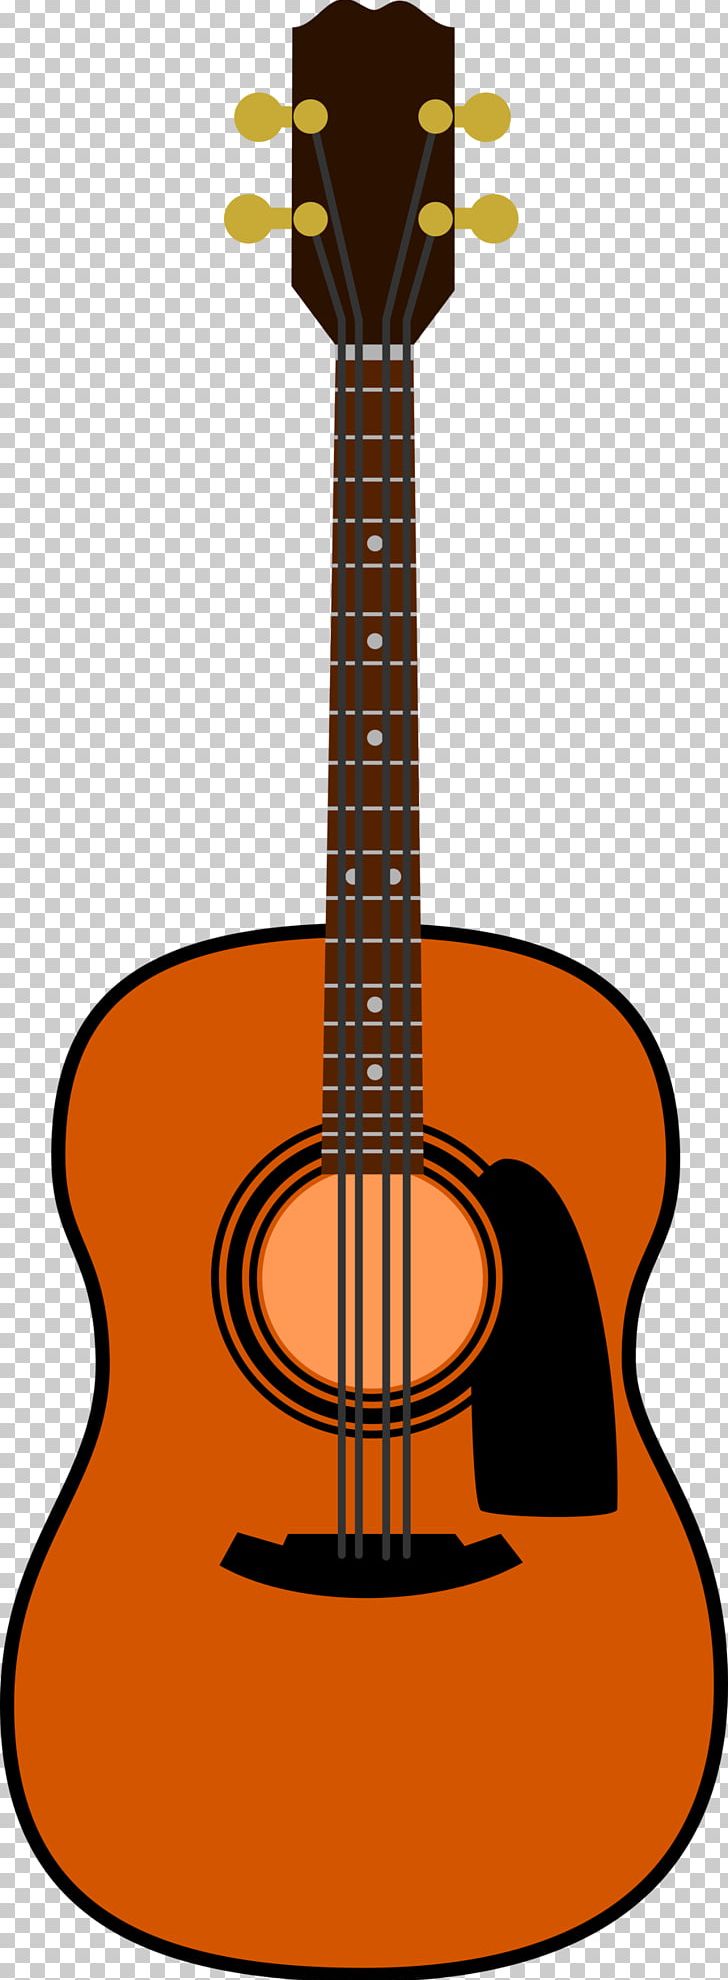 Acoustic-electric Guitar Musical Instruments Tiple Cuatro PNG, Clipart, Acoustic Electric Guitar, Classical Guitar, Cuatro, Guitar Accessory, Musical Instruments Free PNG Download